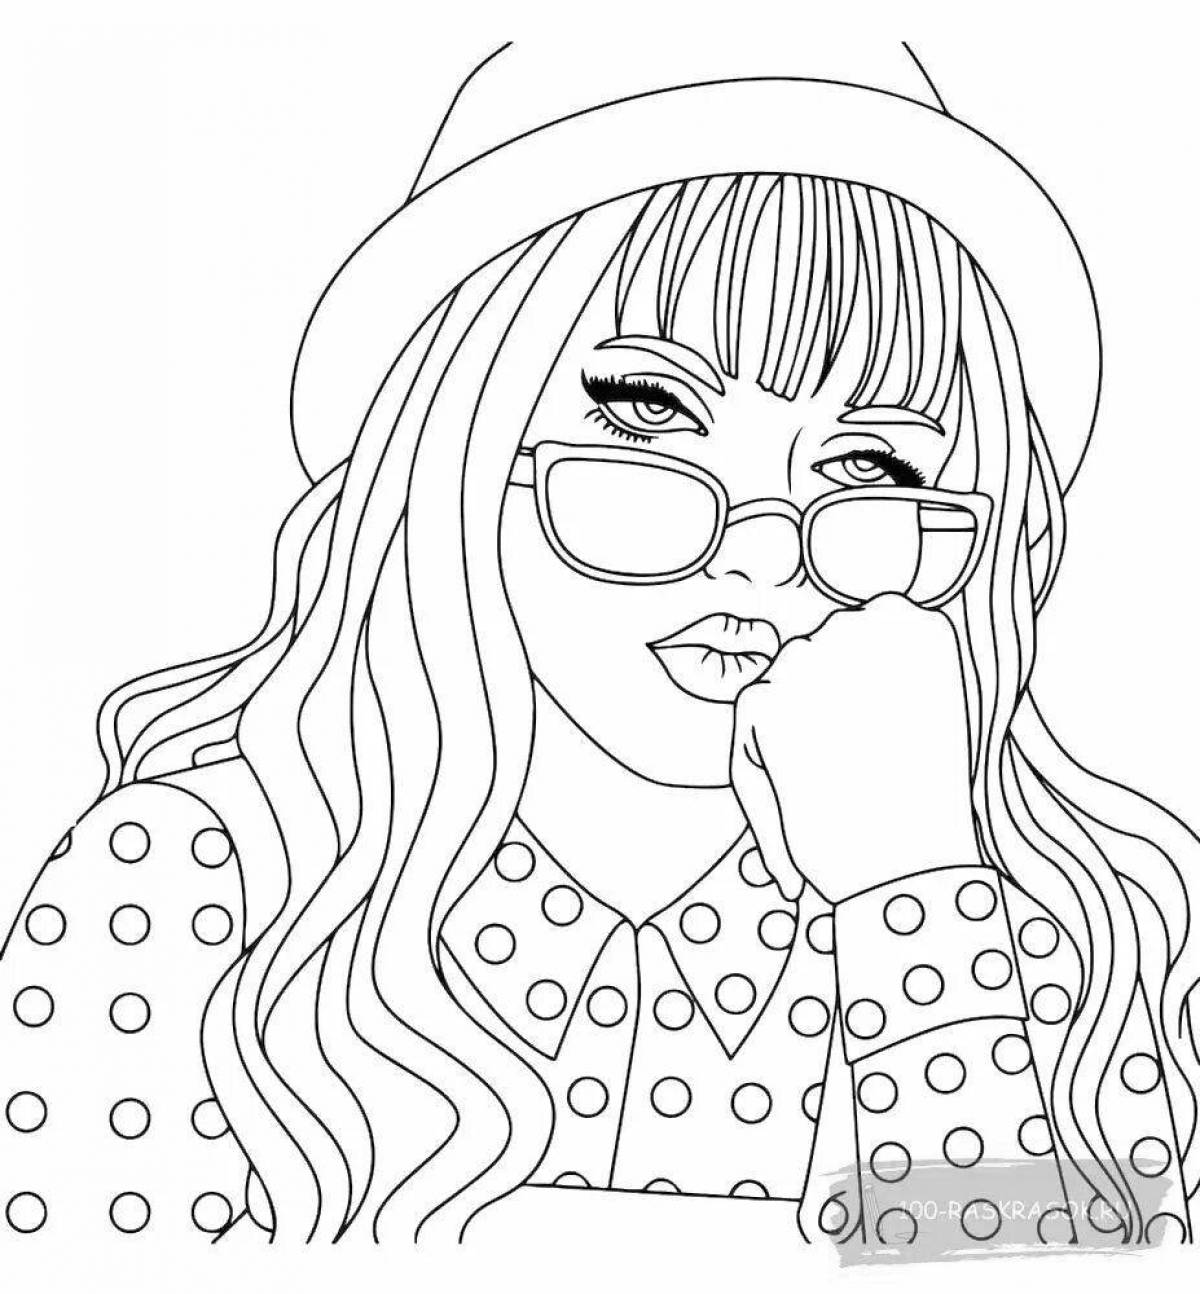 Coloring pages for children 12 years old